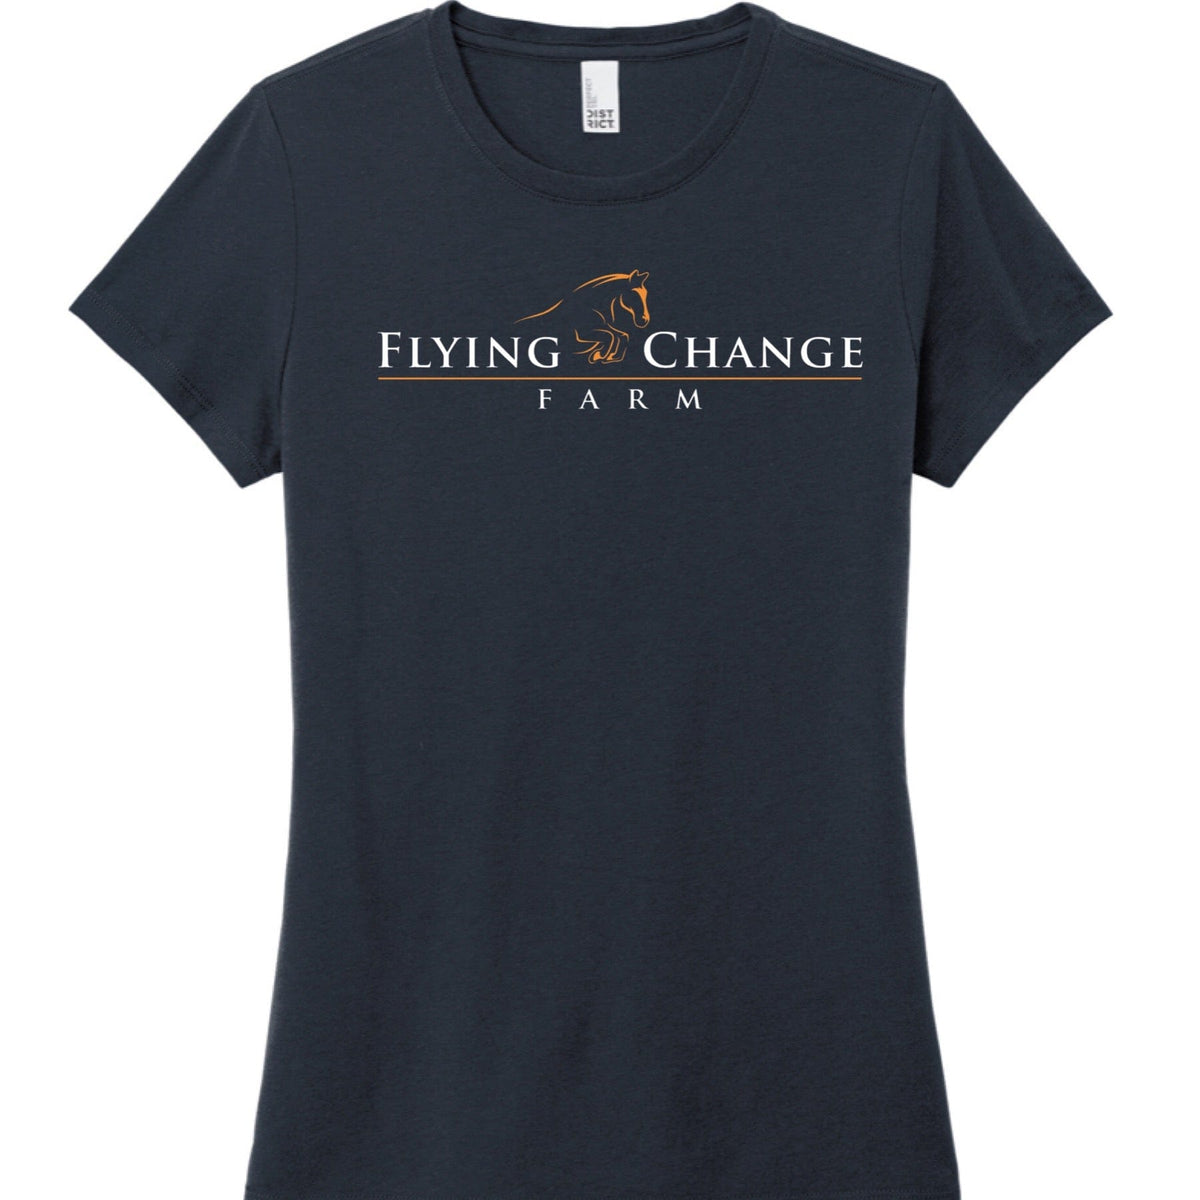 Equestrian Team Apparel Flying Change Farm Tee Shirt equestrian team apparel online tack store mobile tack store custom farm apparel custom show stable clothing equestrian lifestyle horse show clothing riding clothes horses equestrian tack store